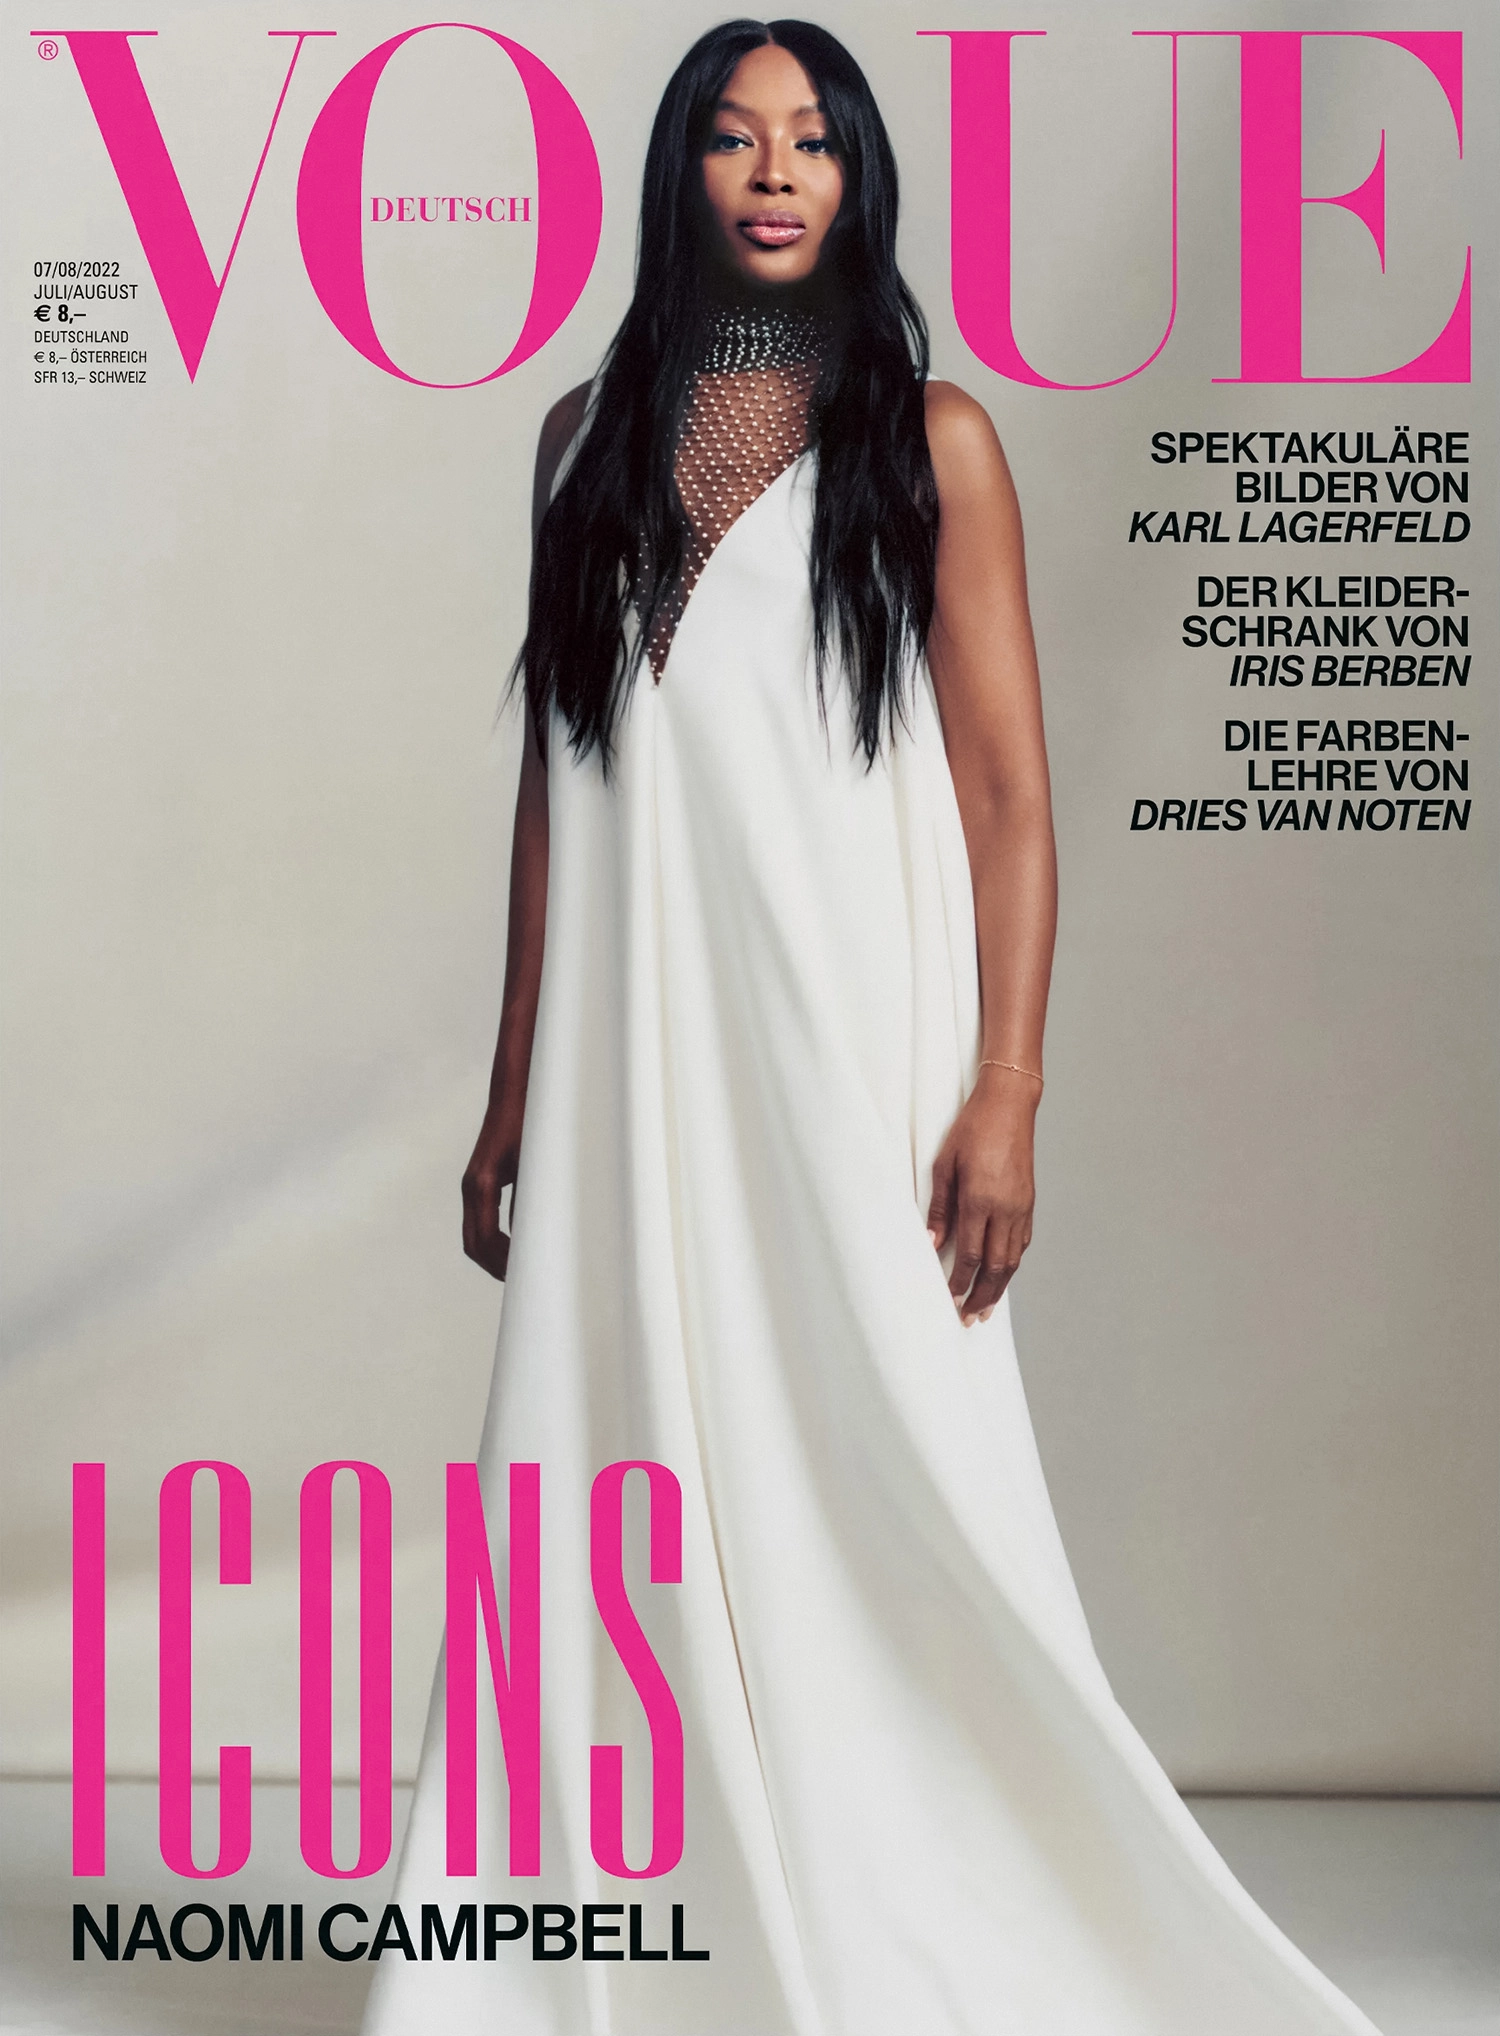 Naomi Campbell covers Vogue Germany July/August 2022 by Dan Martensen